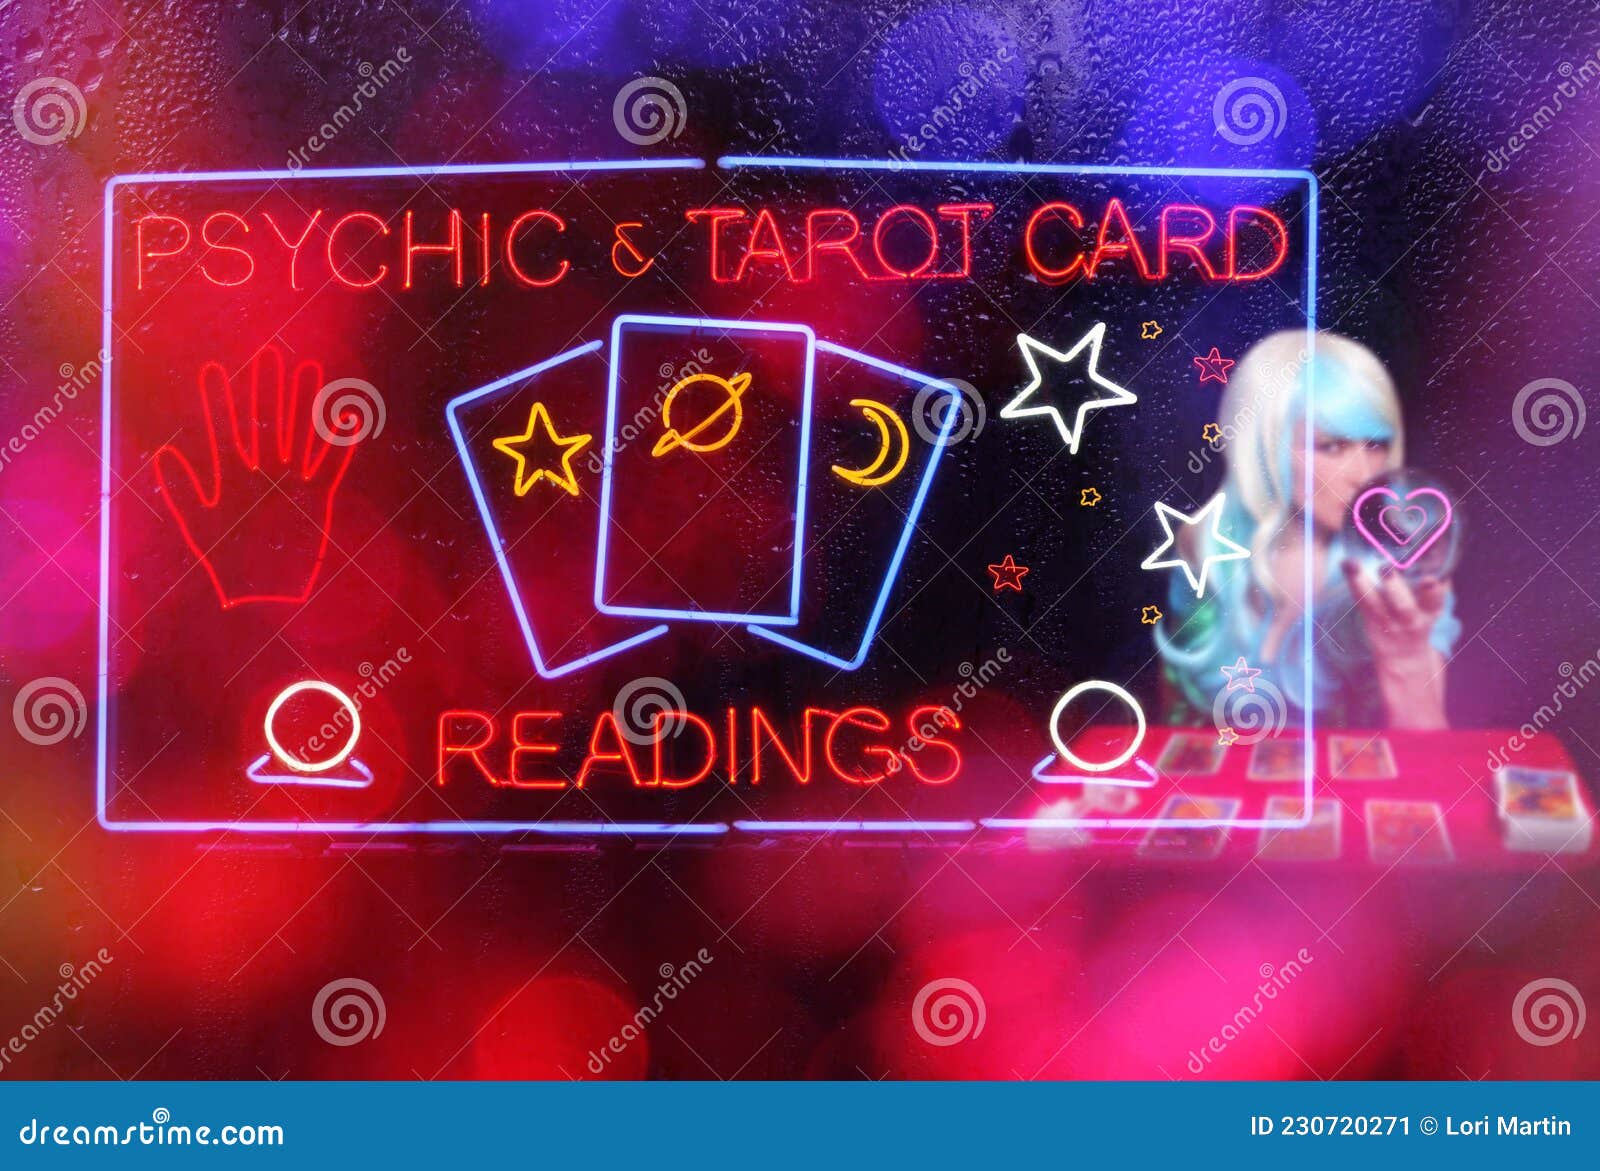 Tarot Card Readings Neon Sign in Window with Psychic Tarot Card Reader in  Background Stock Image - Image of love, astrology: 230720271